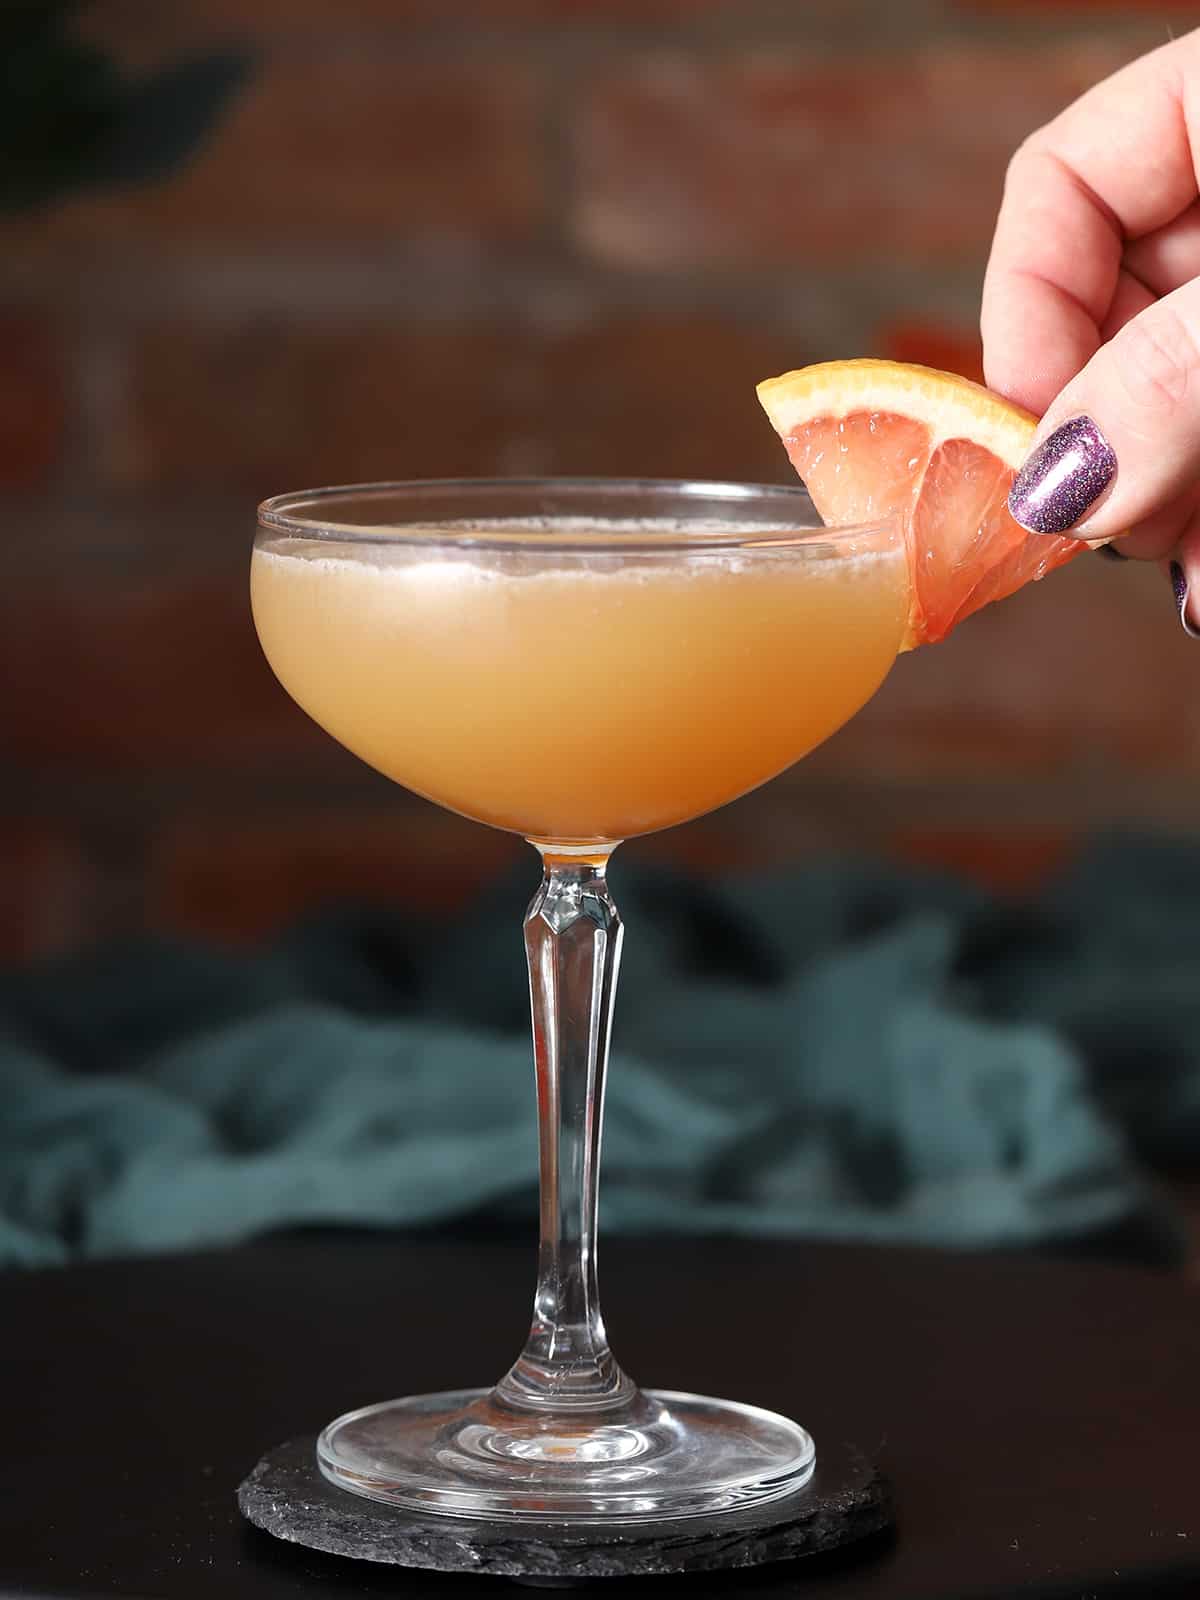 Glasses of brown derby cocktail garnished with grapefruit.